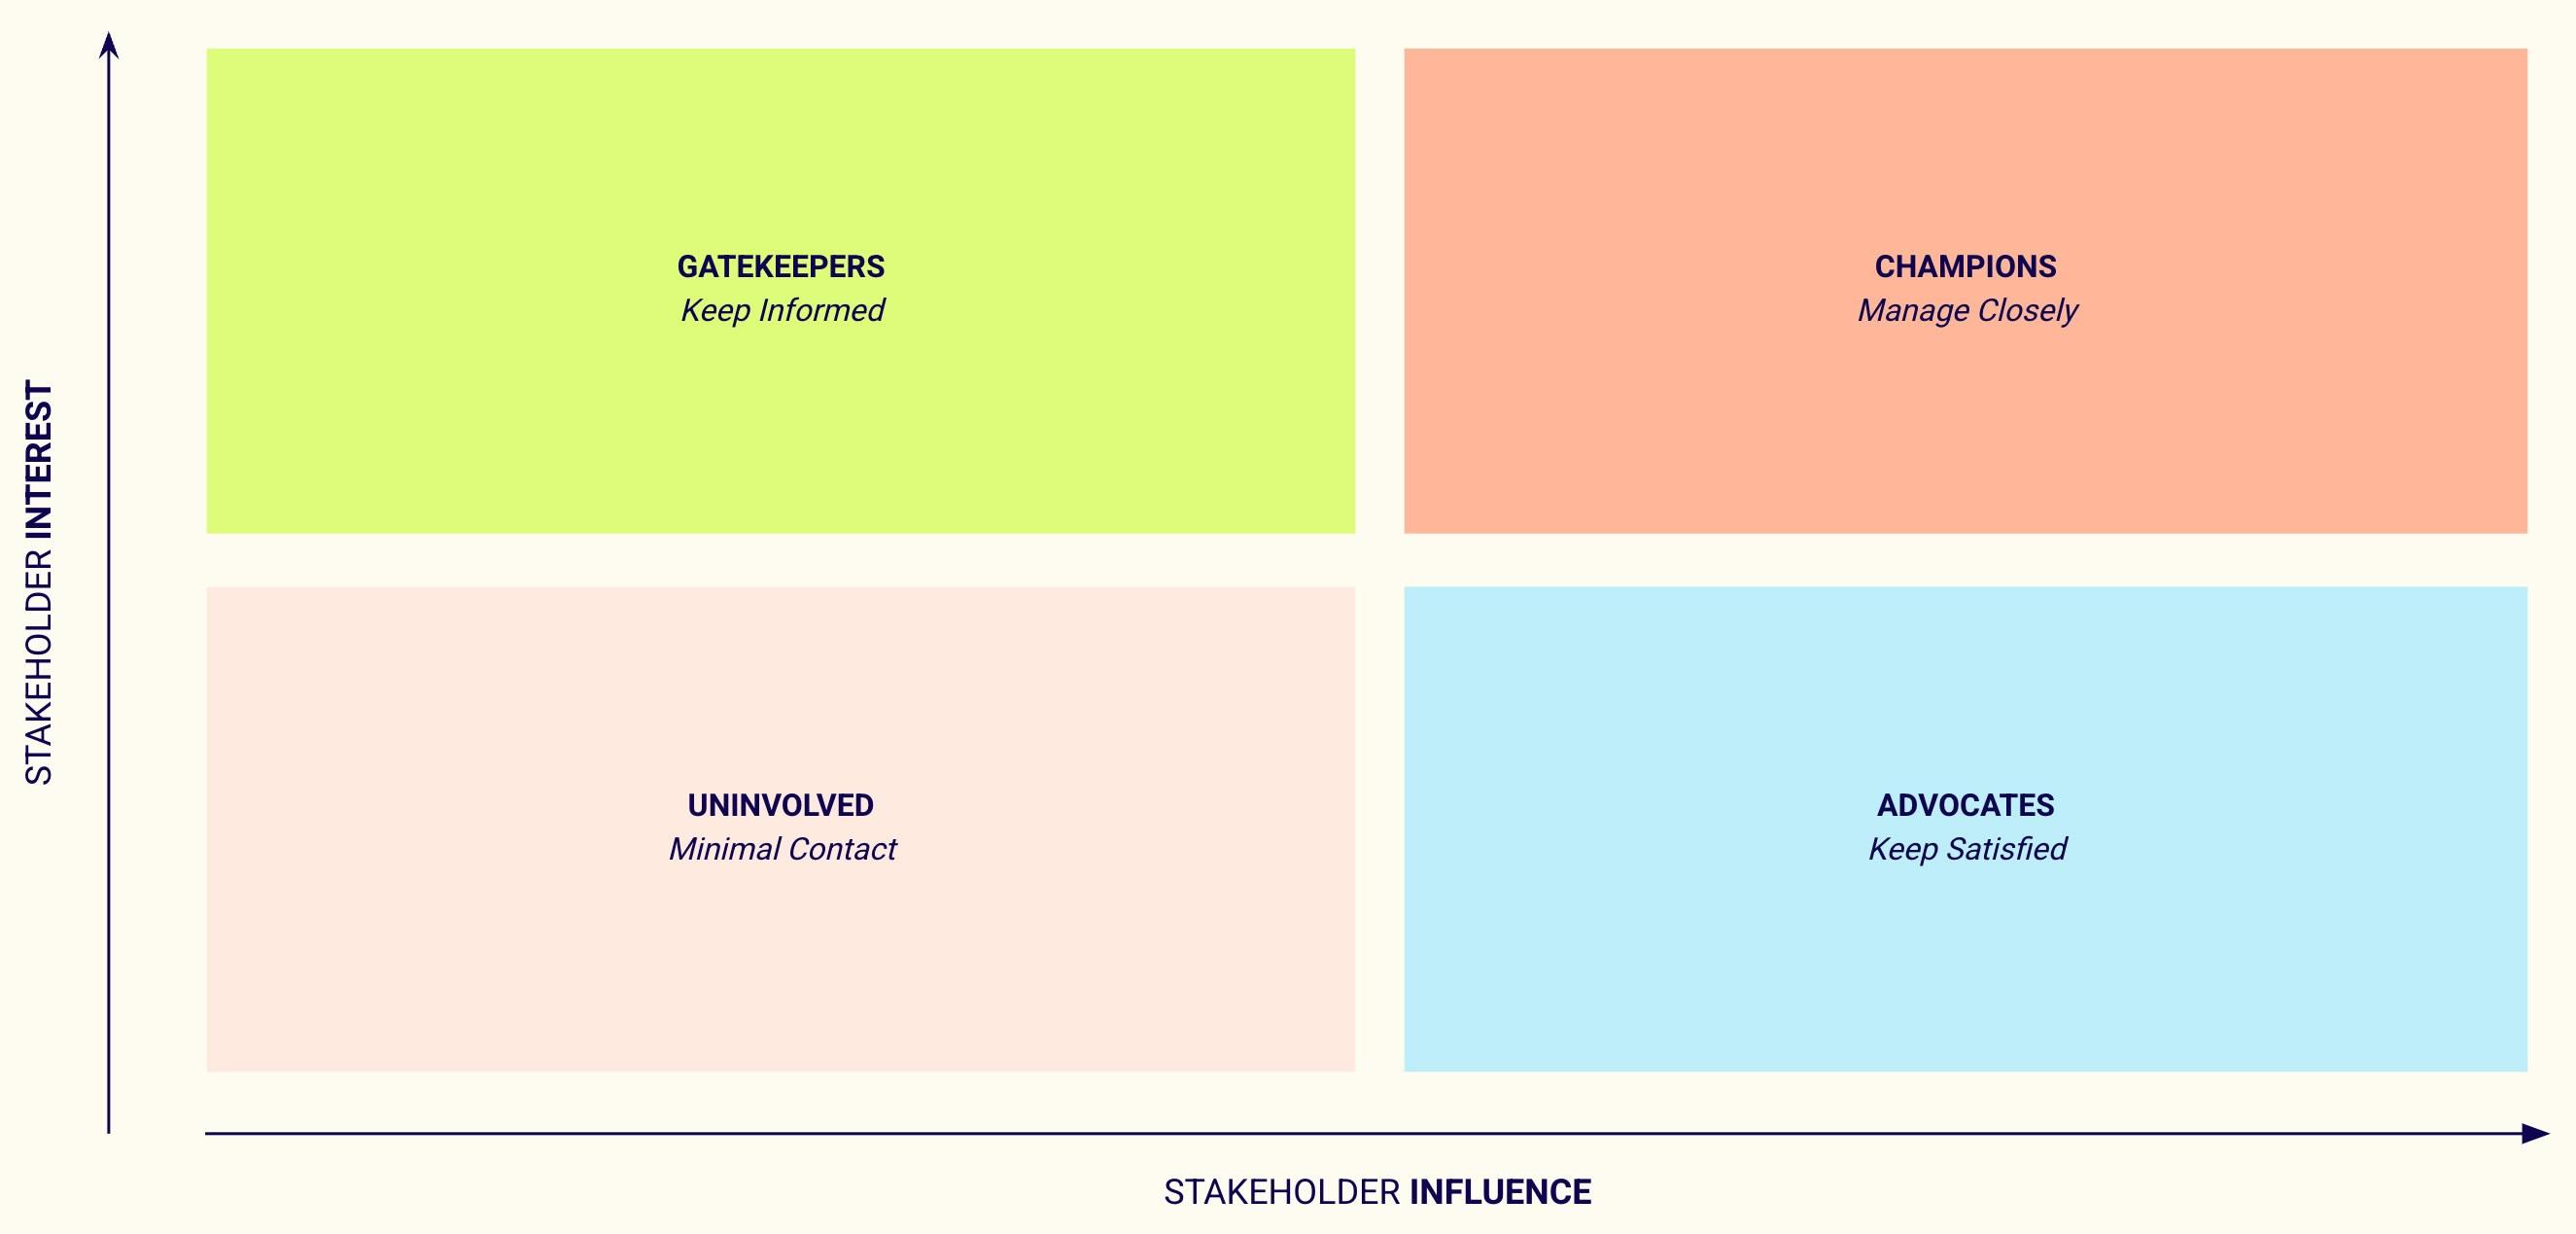 A 2x2 matrix categorizing stakeholders based on their interest and influence. The quadrants are: Gatekeepers (high interest, low influence), Champions (high interest, high influence), Uninvolved (low interest, low influence), Advocates (low interest, high influence).